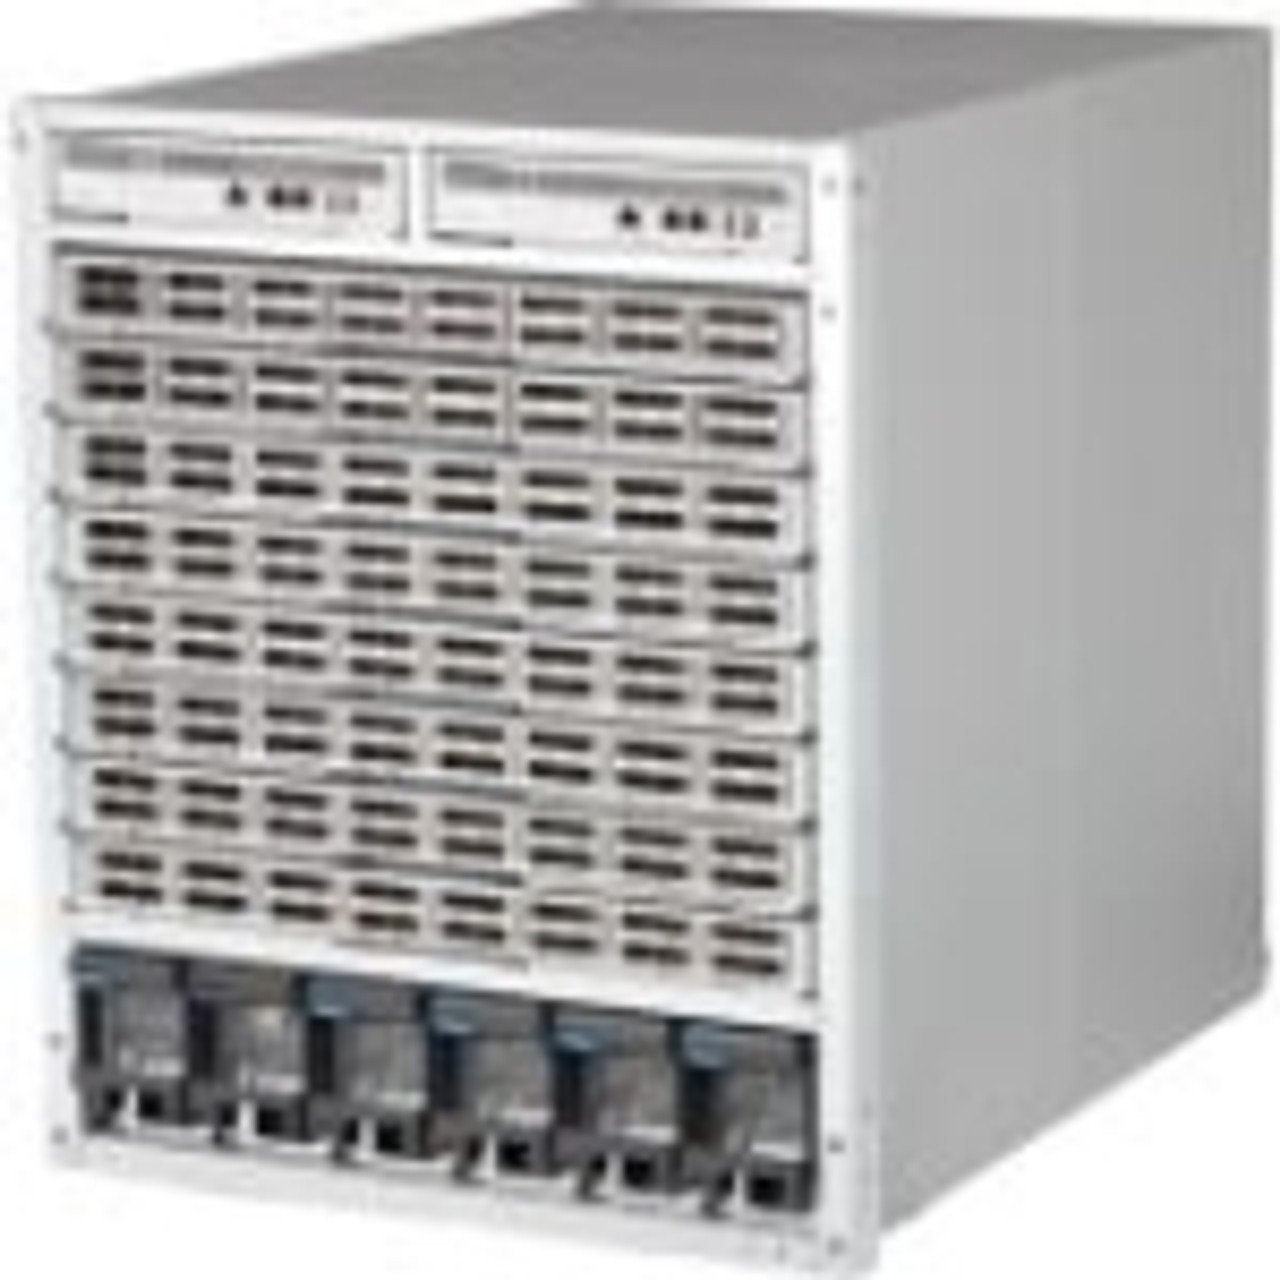 JH816A HP Arista 7308X Switch Chassis 8 Expansion Slot Manageable Modular (Refurbished)